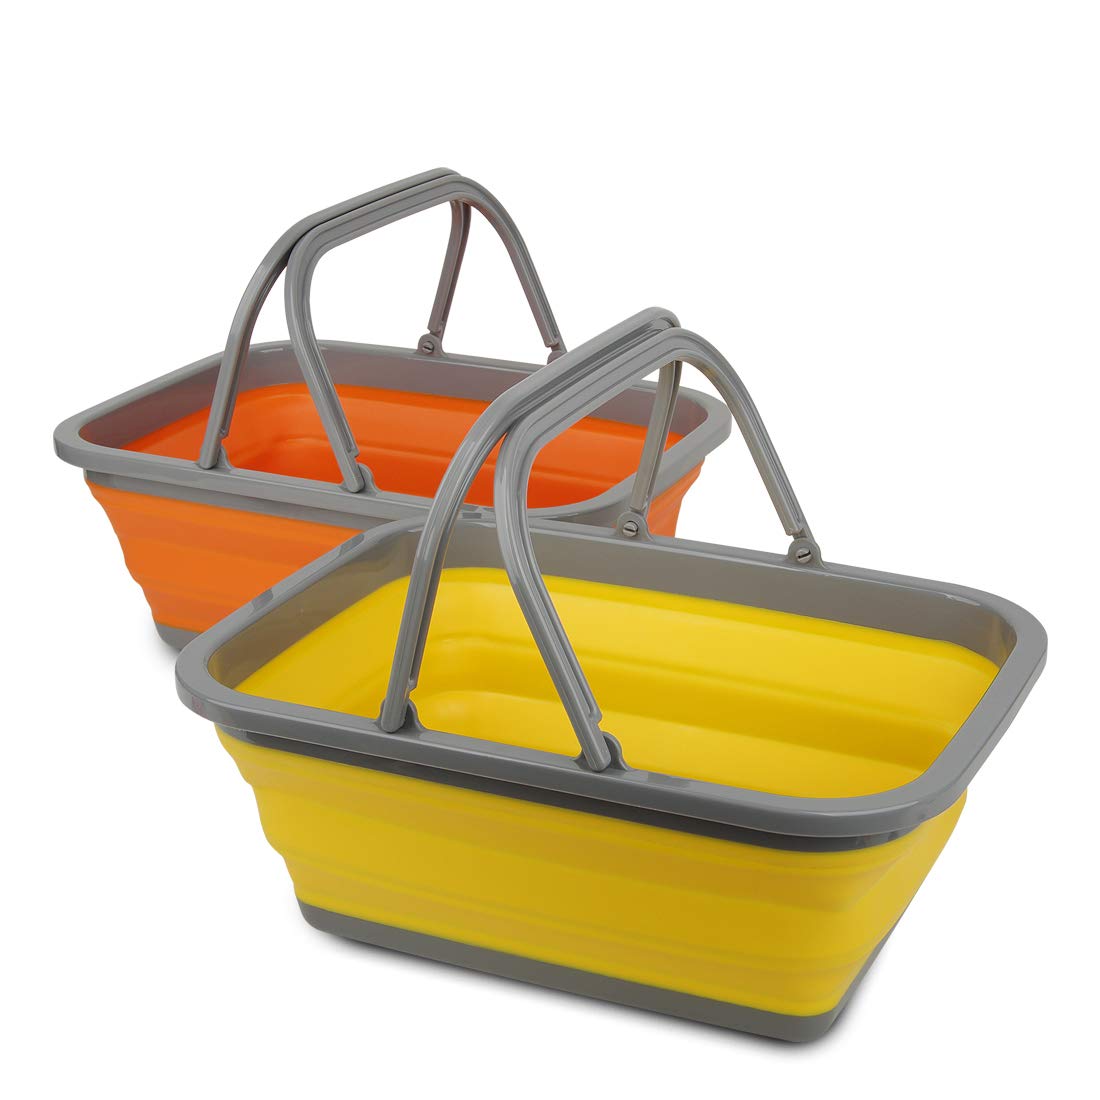 Tiawudi 2 Pack Collapsible Sink with 2.25 Gal / 8.5L Each Wash Basin for  Washing Dishes, Camping, Hiking and Home Orange and Yellow